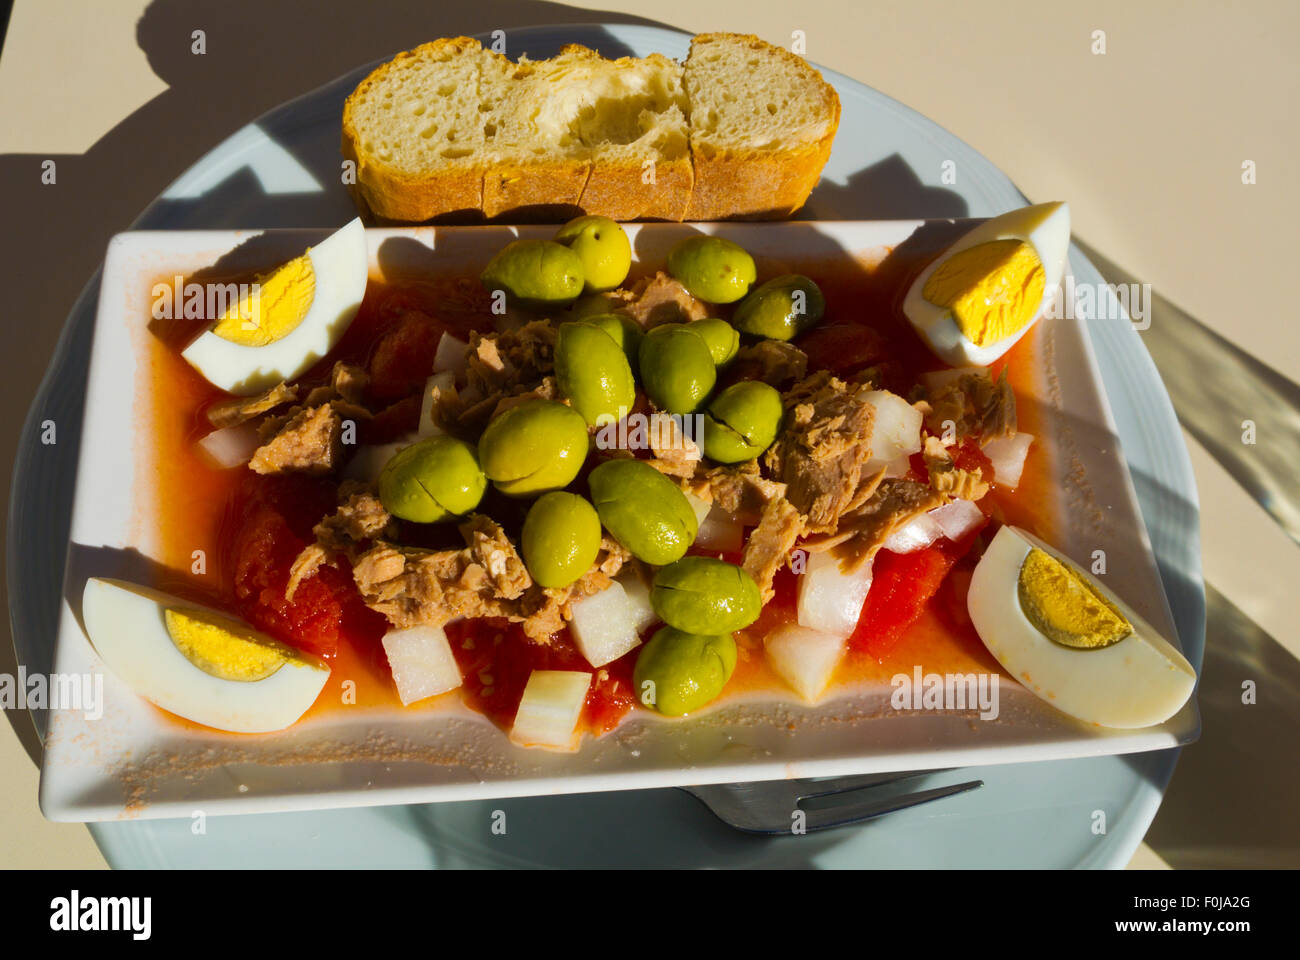 Murcian style salad, with tuna, olives, eggs and tomatoes, Murcia, Spain Stock Photo